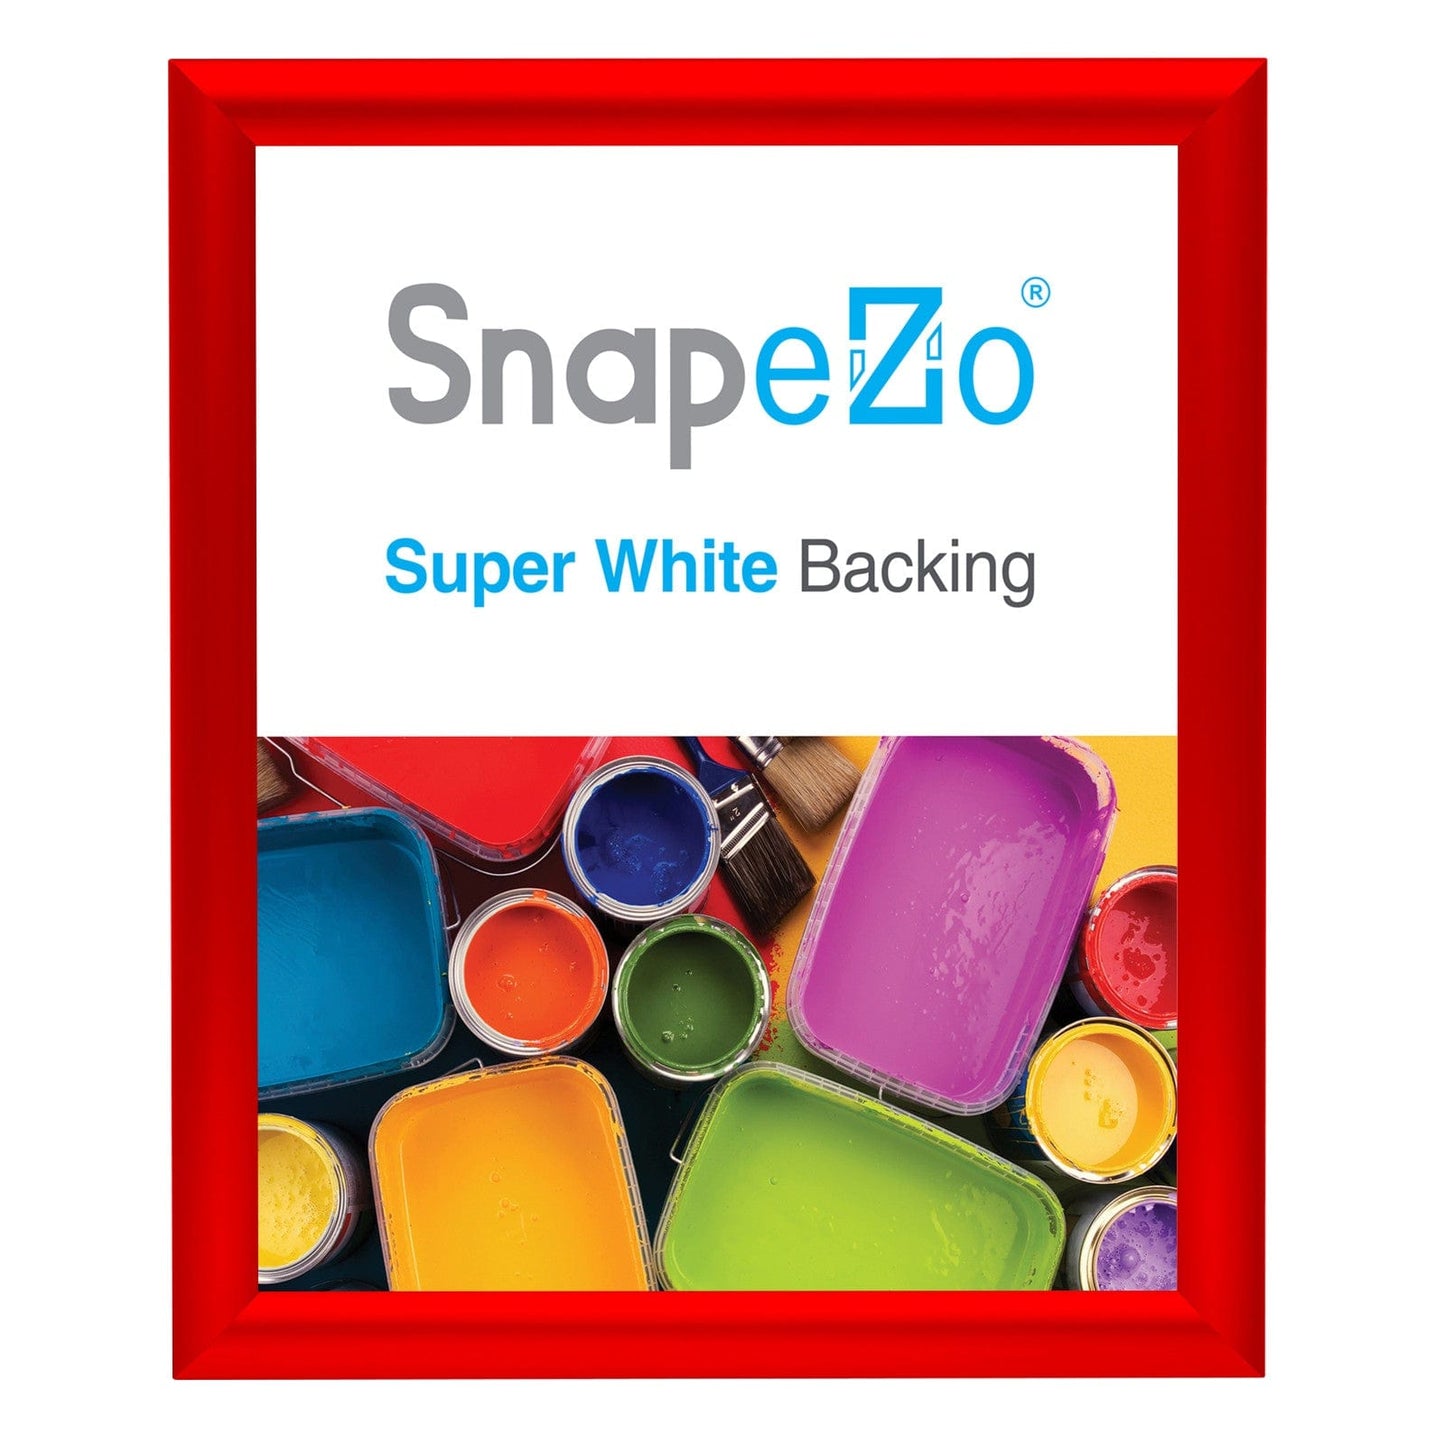 9x11 Inches Red SnapeZo® Snap Frame - 1" profile - Snap Frames Direct